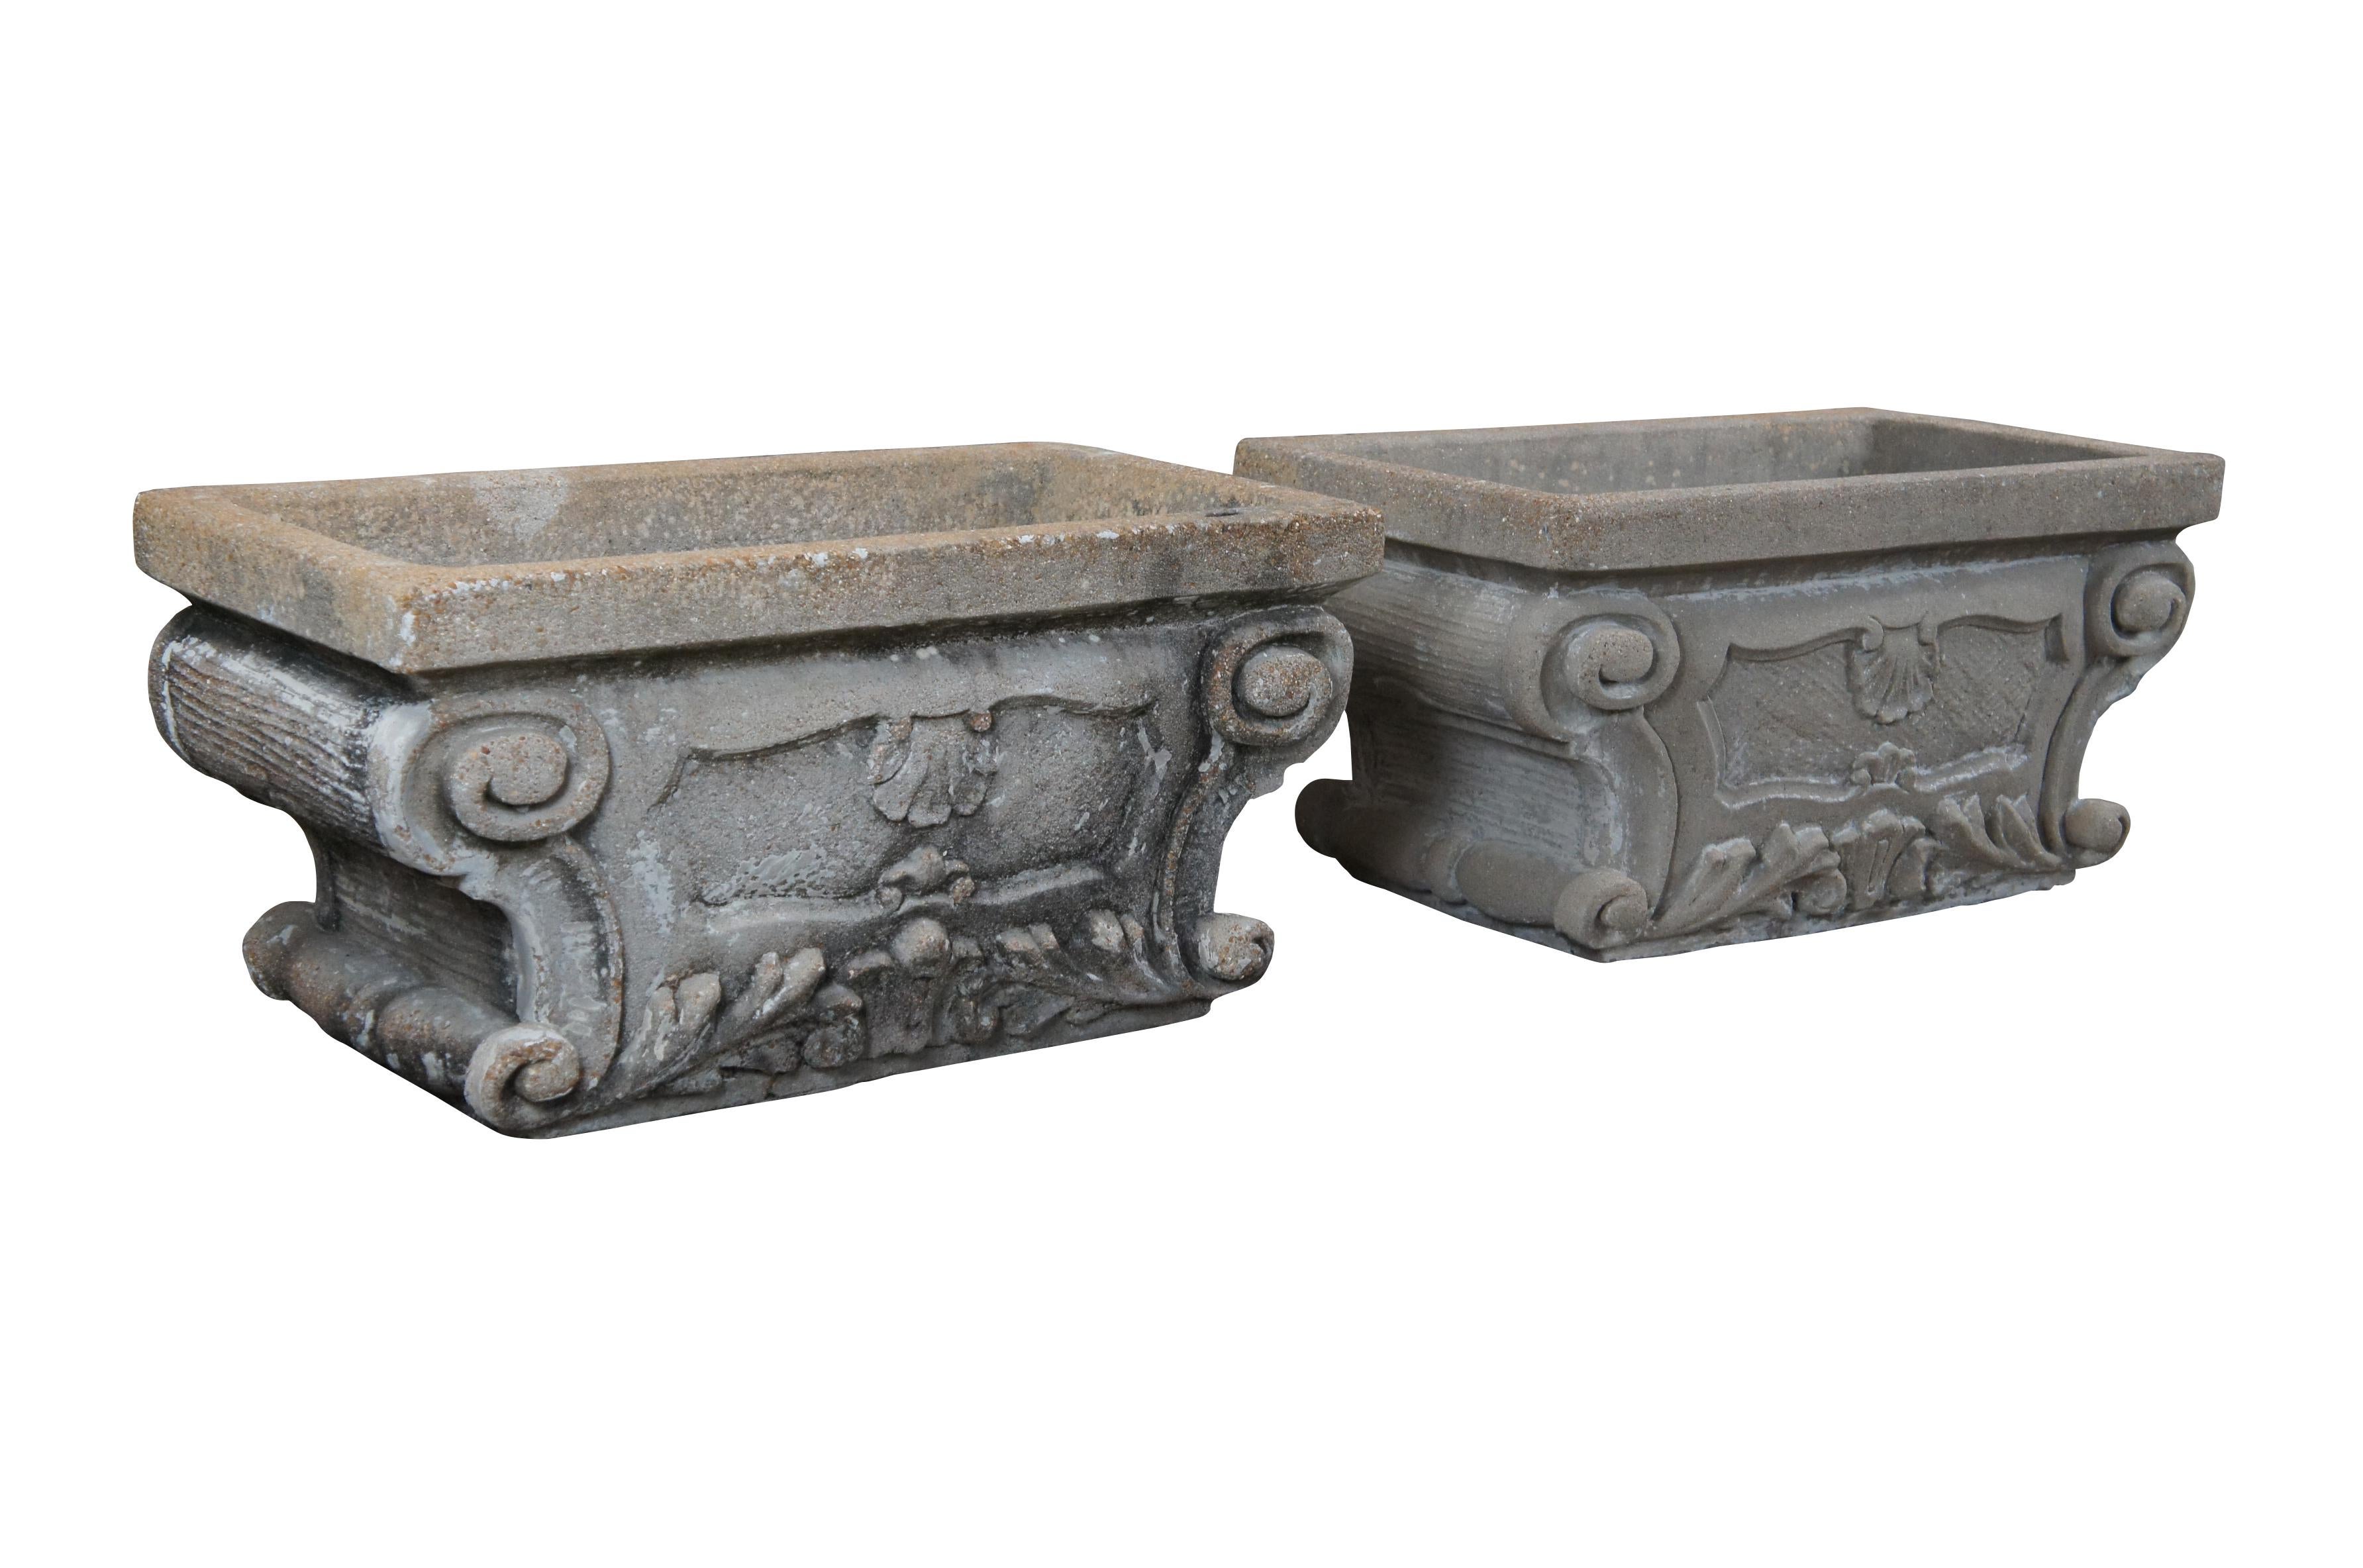 2 Vintage French Baroque Ornamental Concrete Stone Garden Flower Planters In Good Condition For Sale In Dayton, OH